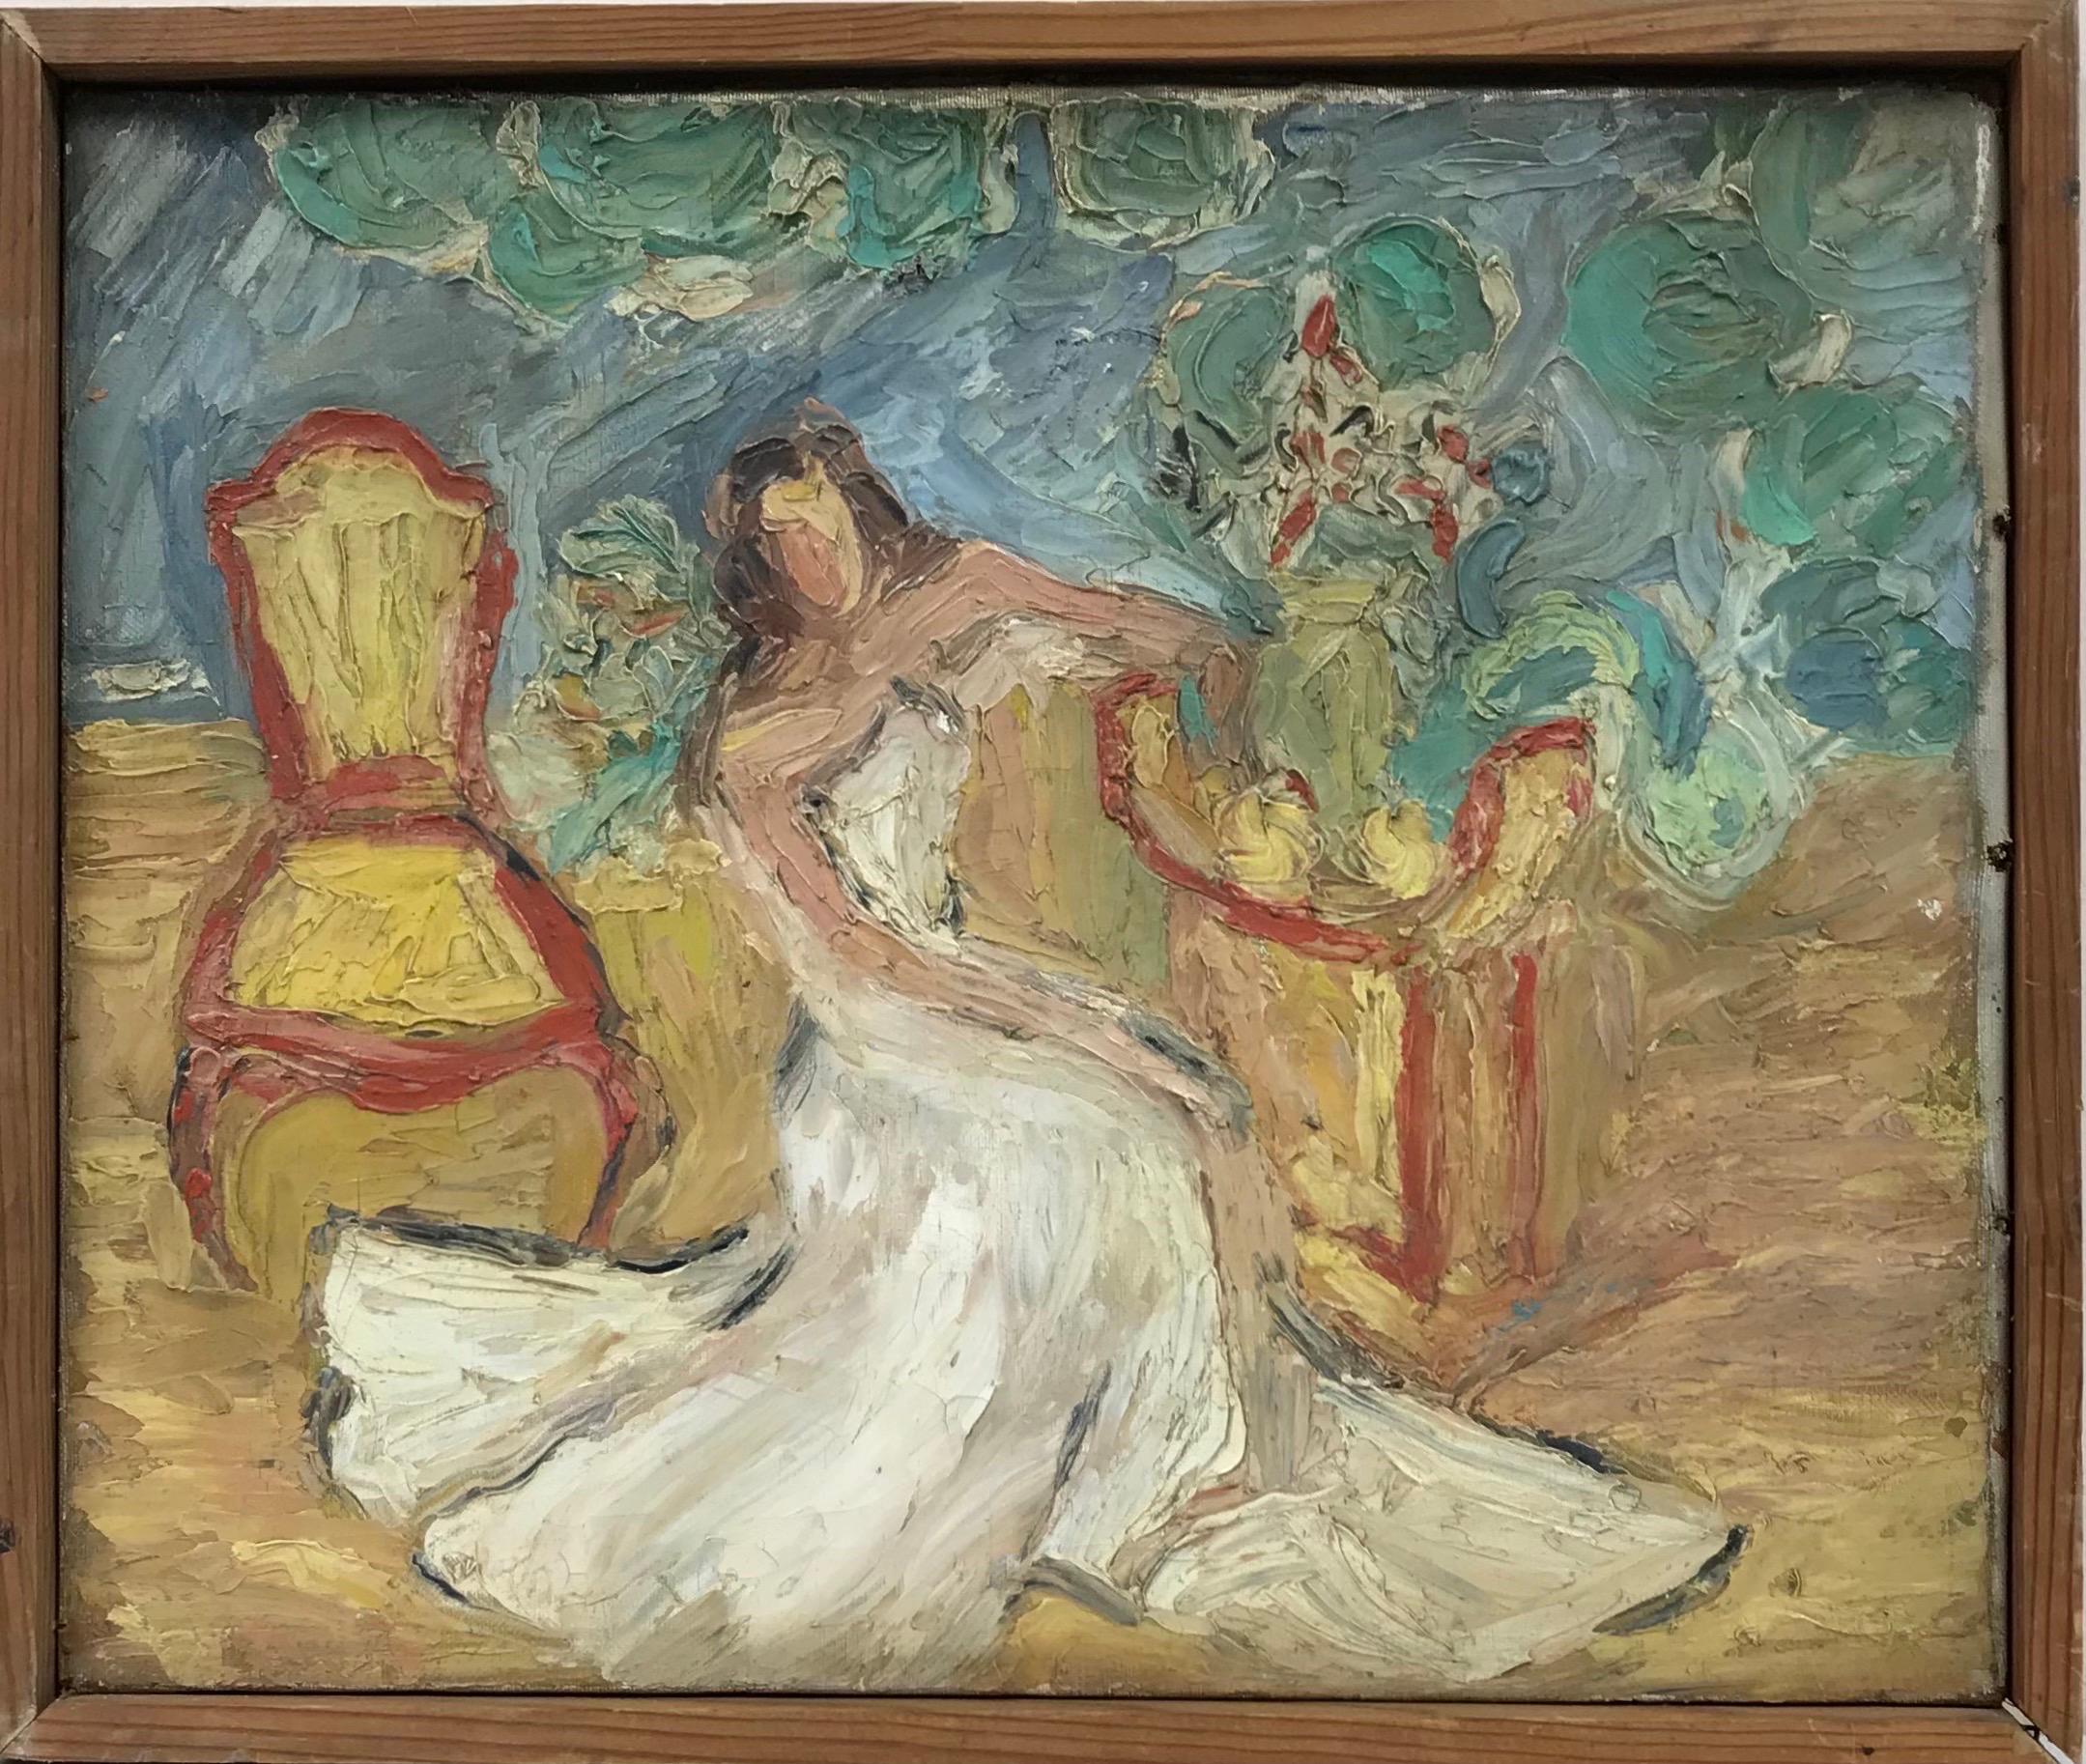 Stunning 1930s French Oil Lady in Wedding Dress in Interior, very thick impasto  - Painting by Early 20th Century French